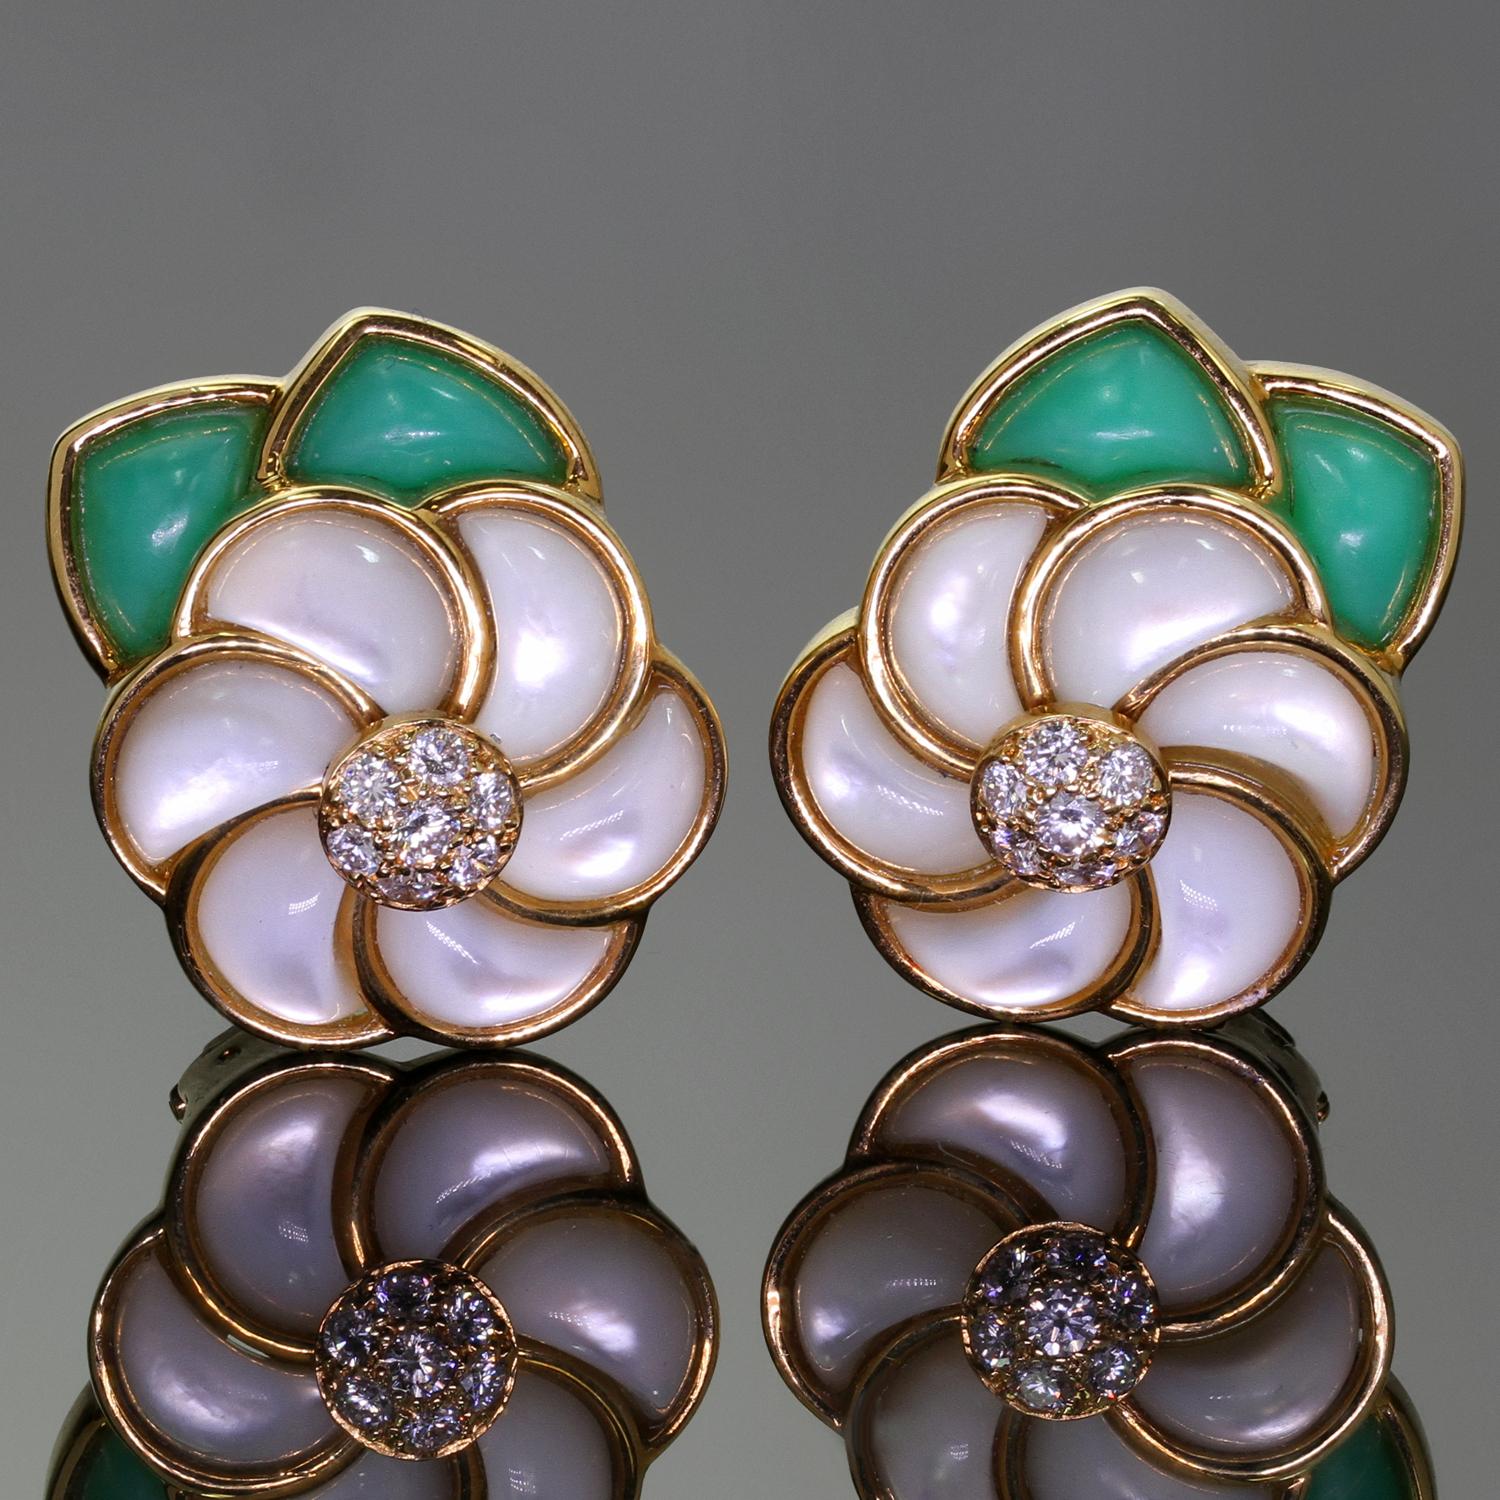 These exquisite Van Cleef & Arpels earrings are feature a flower design crafted in 18k yellow gold, inlaid with green chyrosoprase and mother-of-pearl, and set with brilliant-cut round D-E-F VVS1-VVS2 diamonds weighing an estimated 0.52 carats.